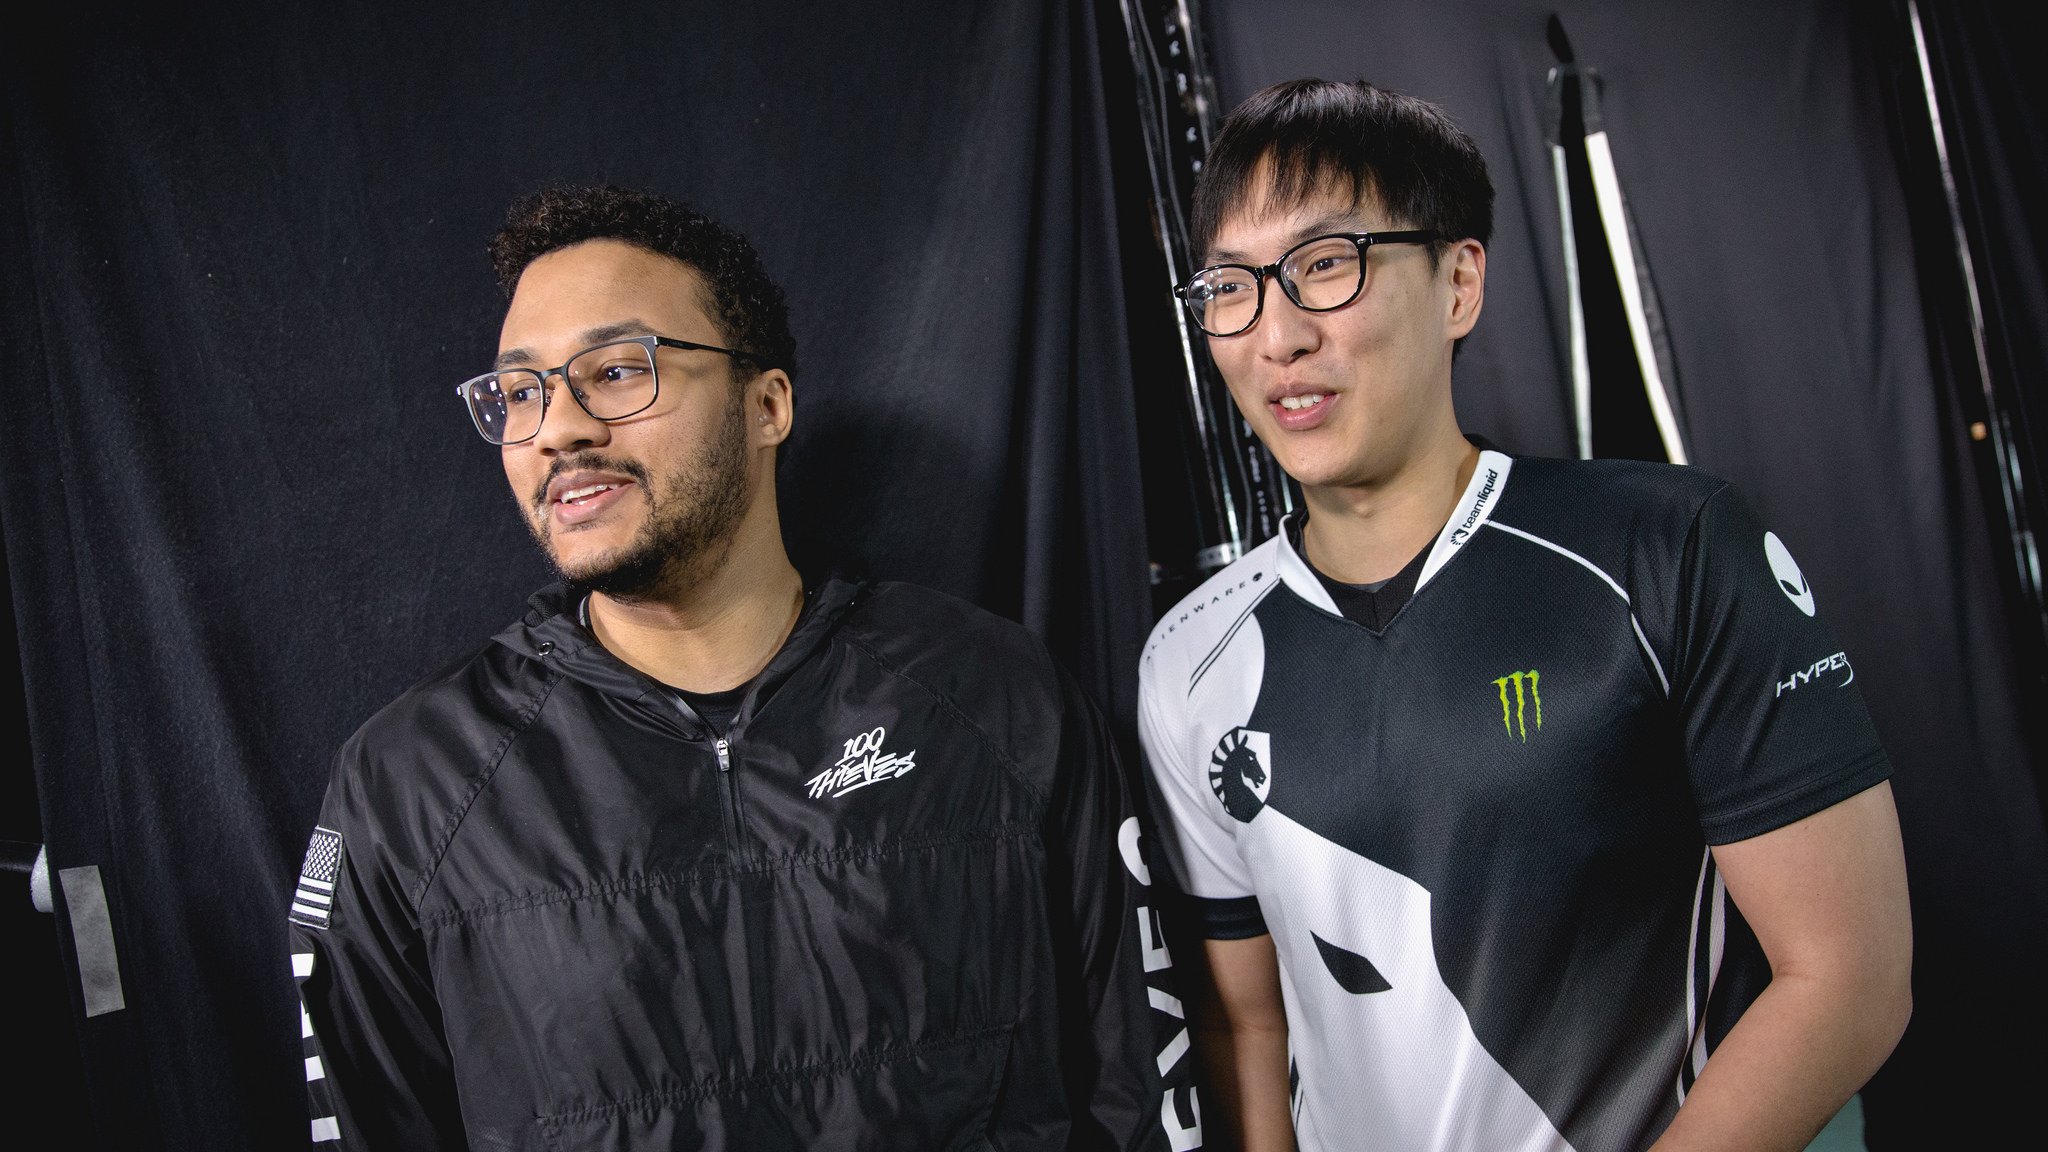 The NA LCS Spring Final will be a mirror match between 100 Thieves and